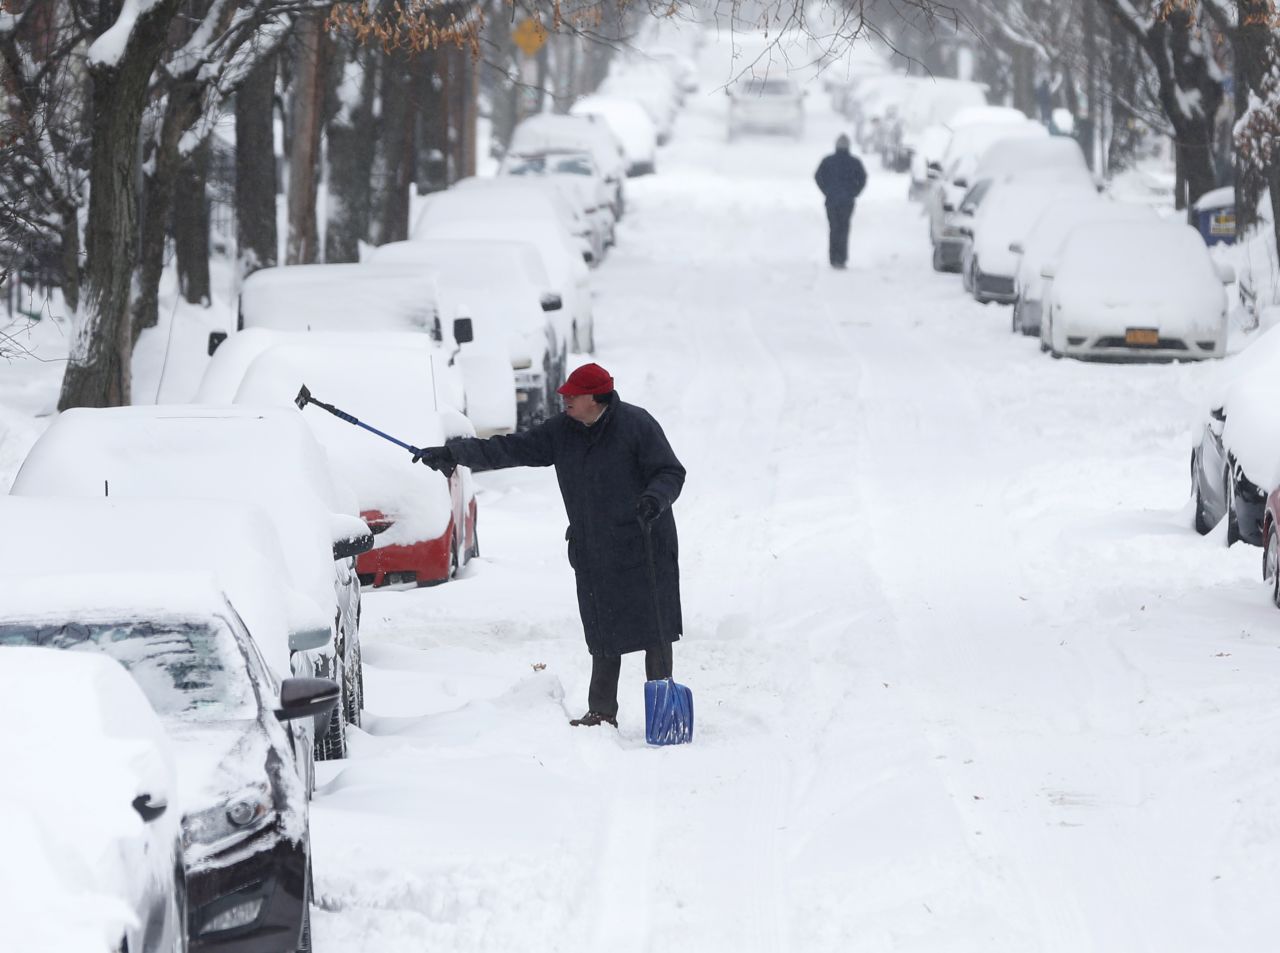 A man clears snow from a vehicle January 3 in Albany, New York.